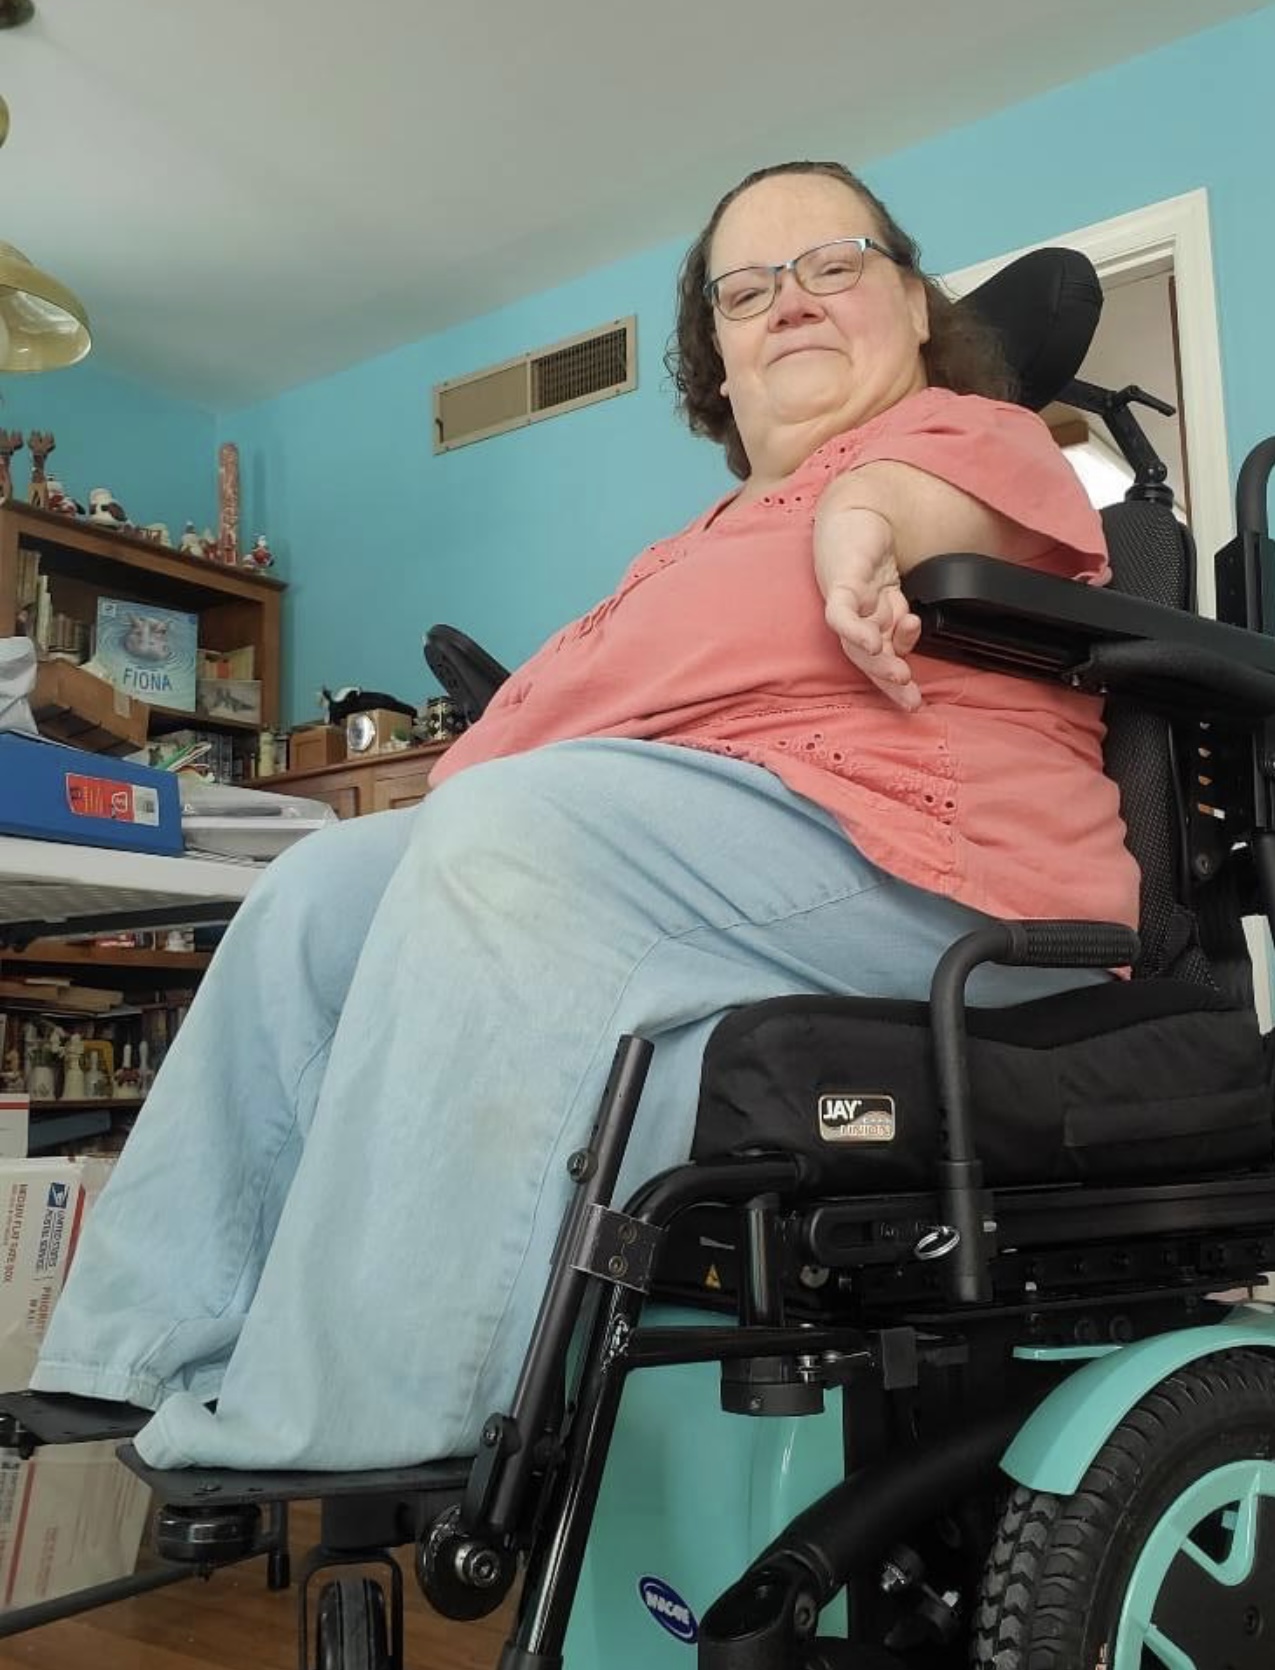 Gwen, with foreshortened arms, waering jeans and a peach-colored shirt, smiling and sitting in her power chair.